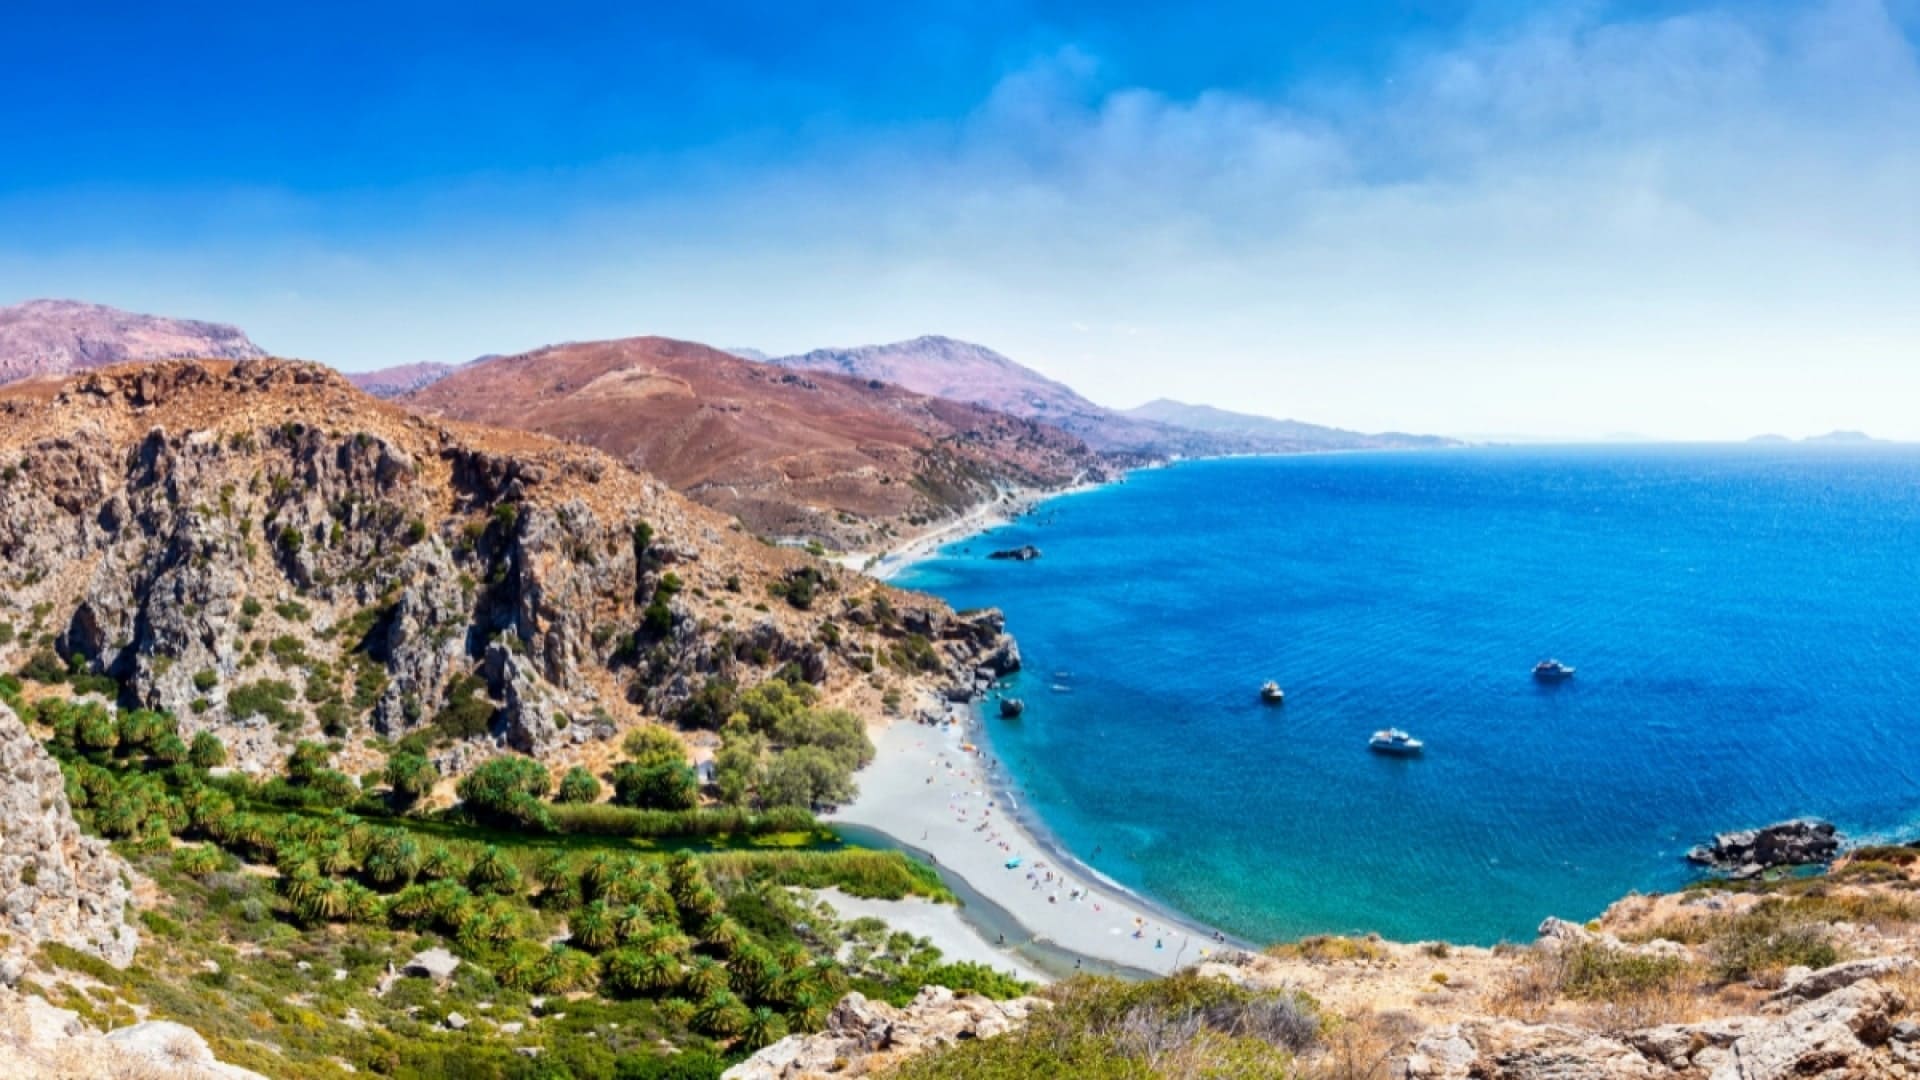 Tips to help you enjoy your trip to Crete